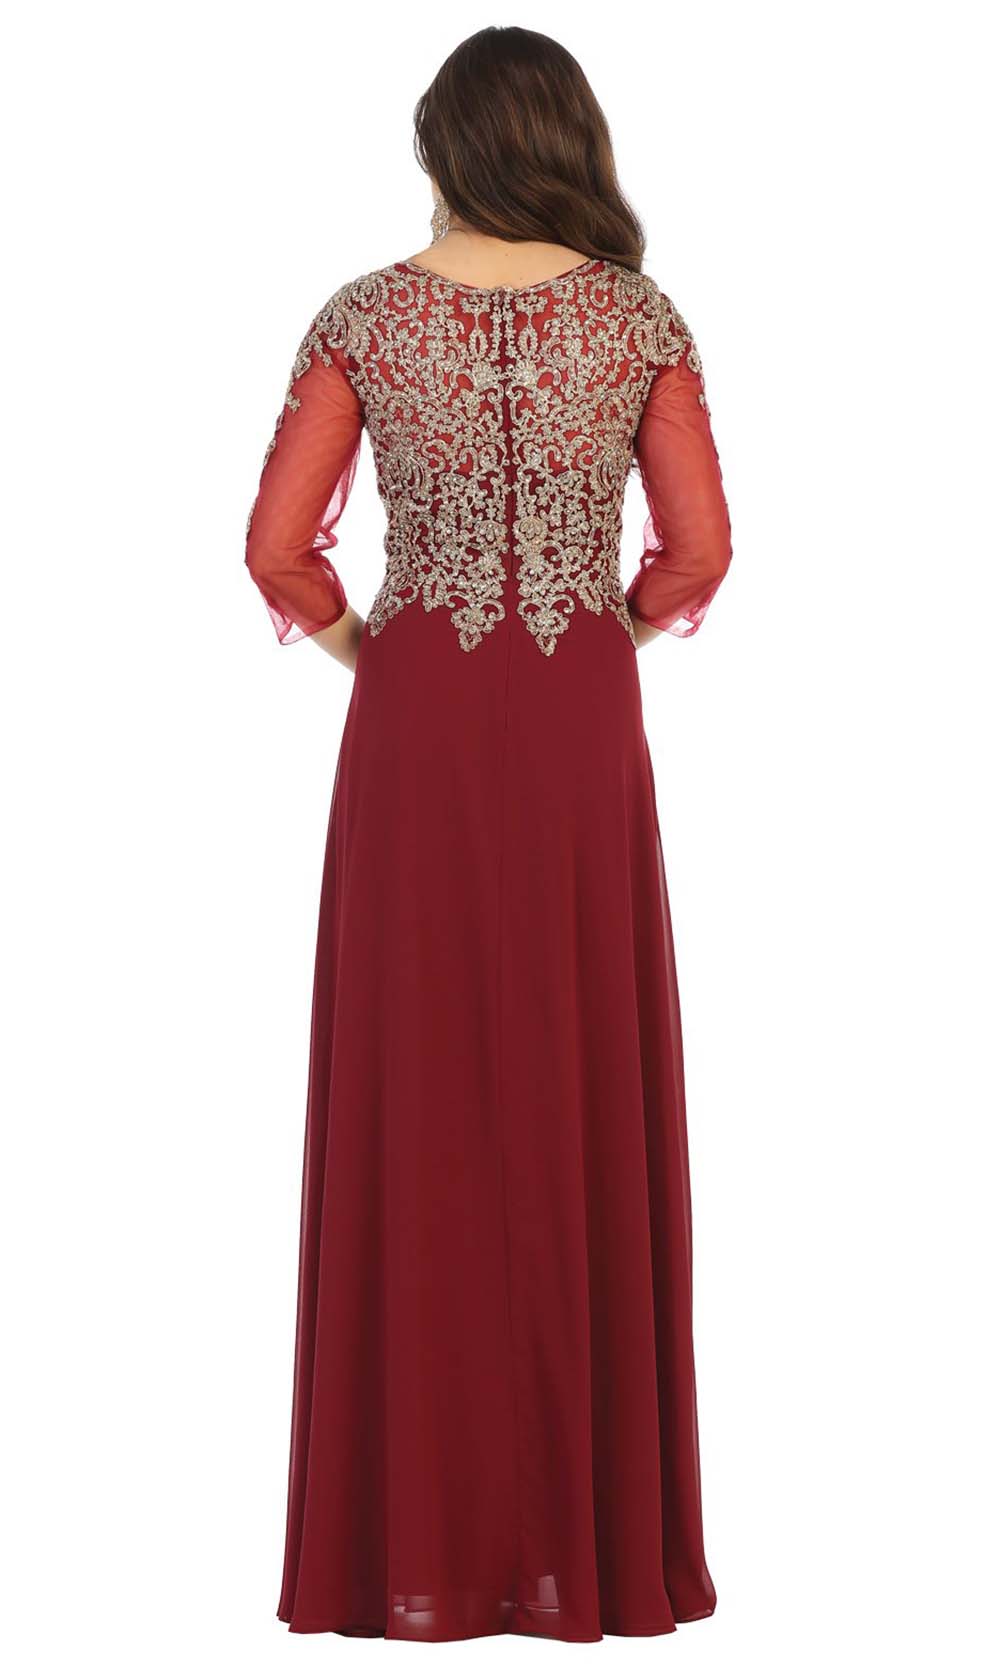 May Queen - MQ1670 Beaded Applique Formal Dress In Burgundy